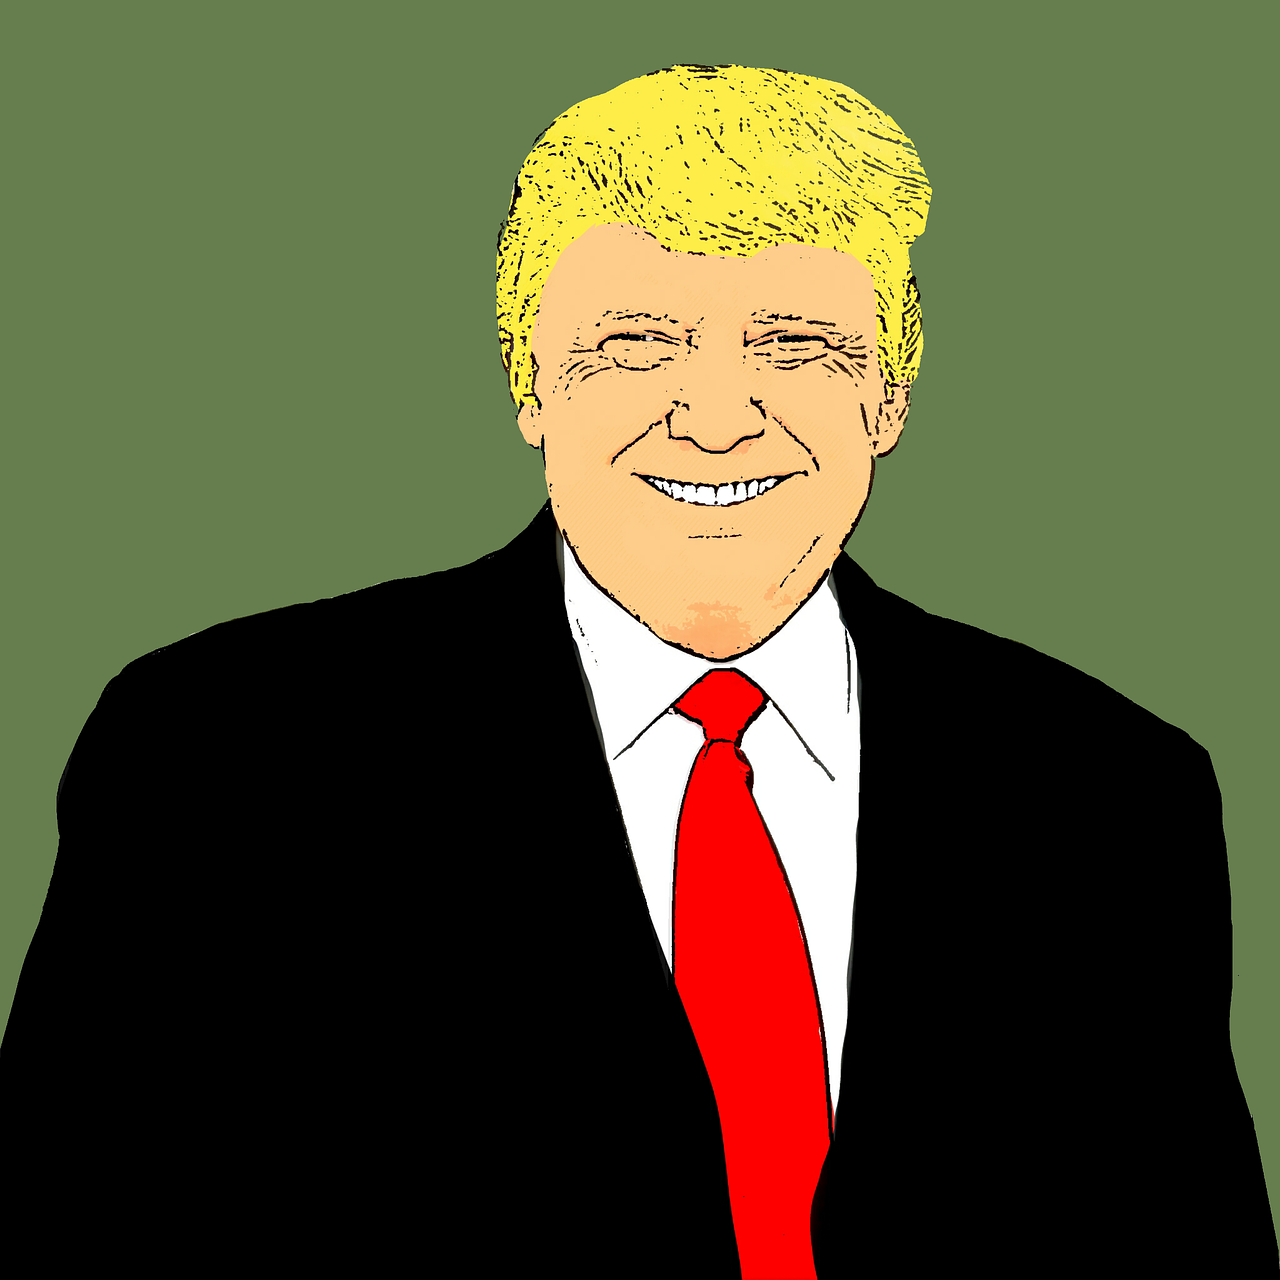 donald trump president of the united states donald free photo